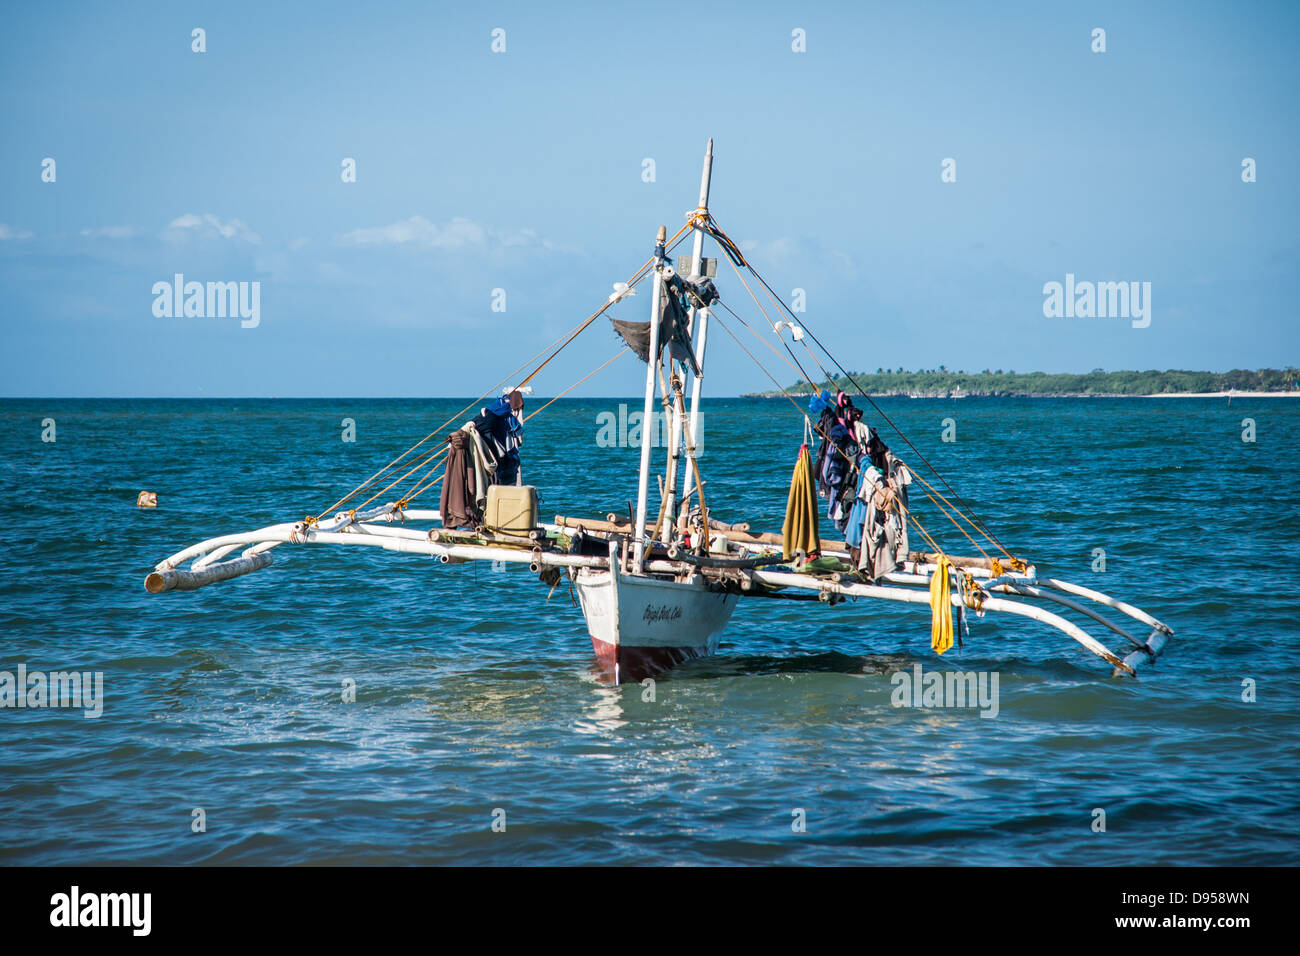 Drying clothes on traditional Filipino fishing boat with